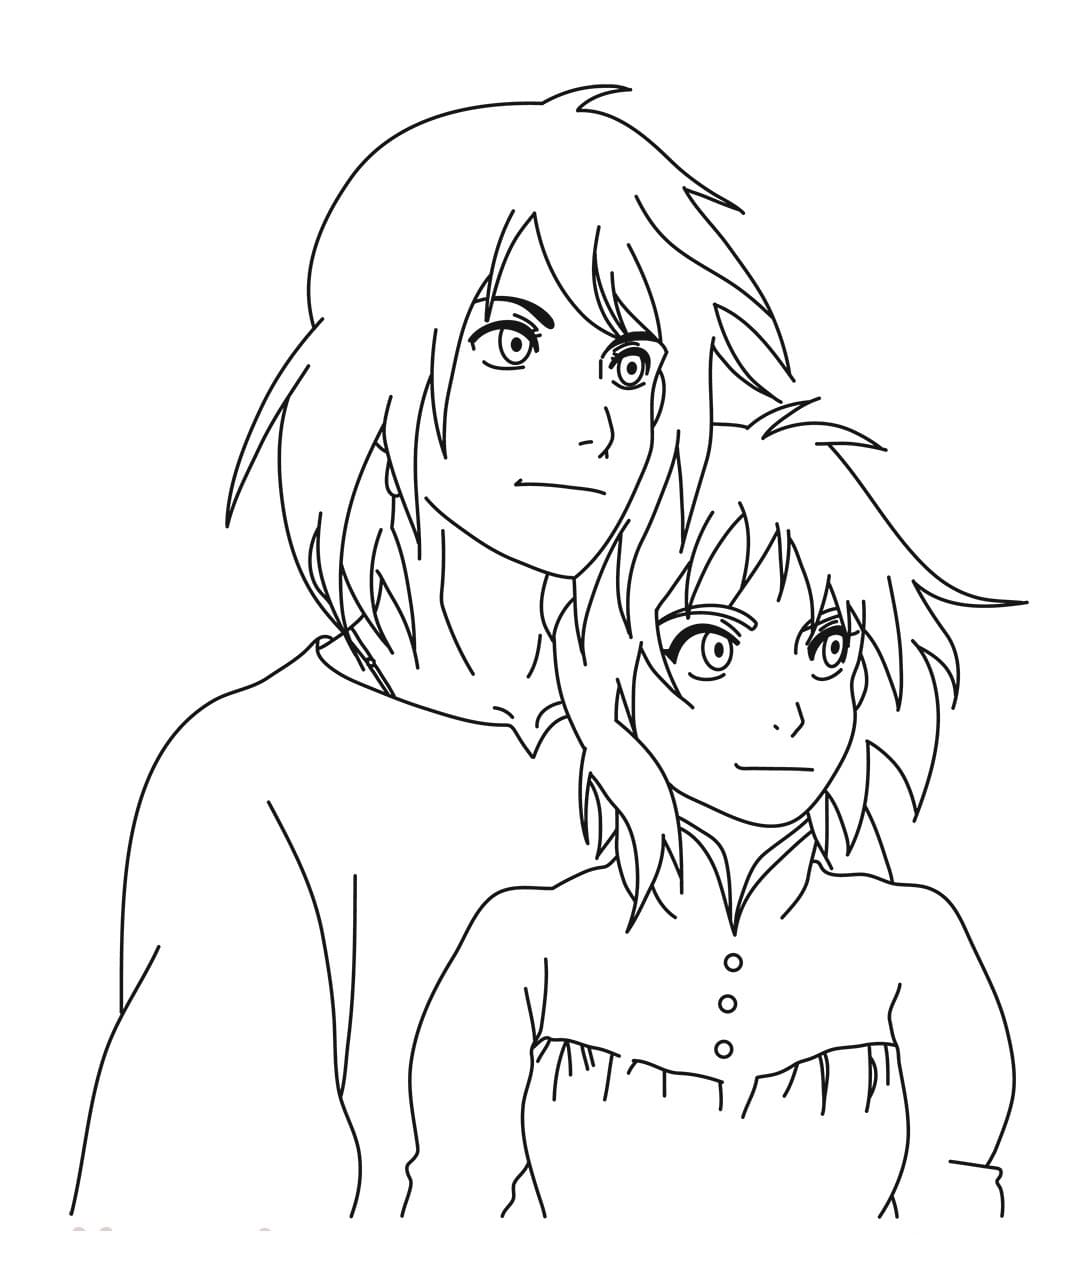 Howl and Sophie from Howl's Moving Castle